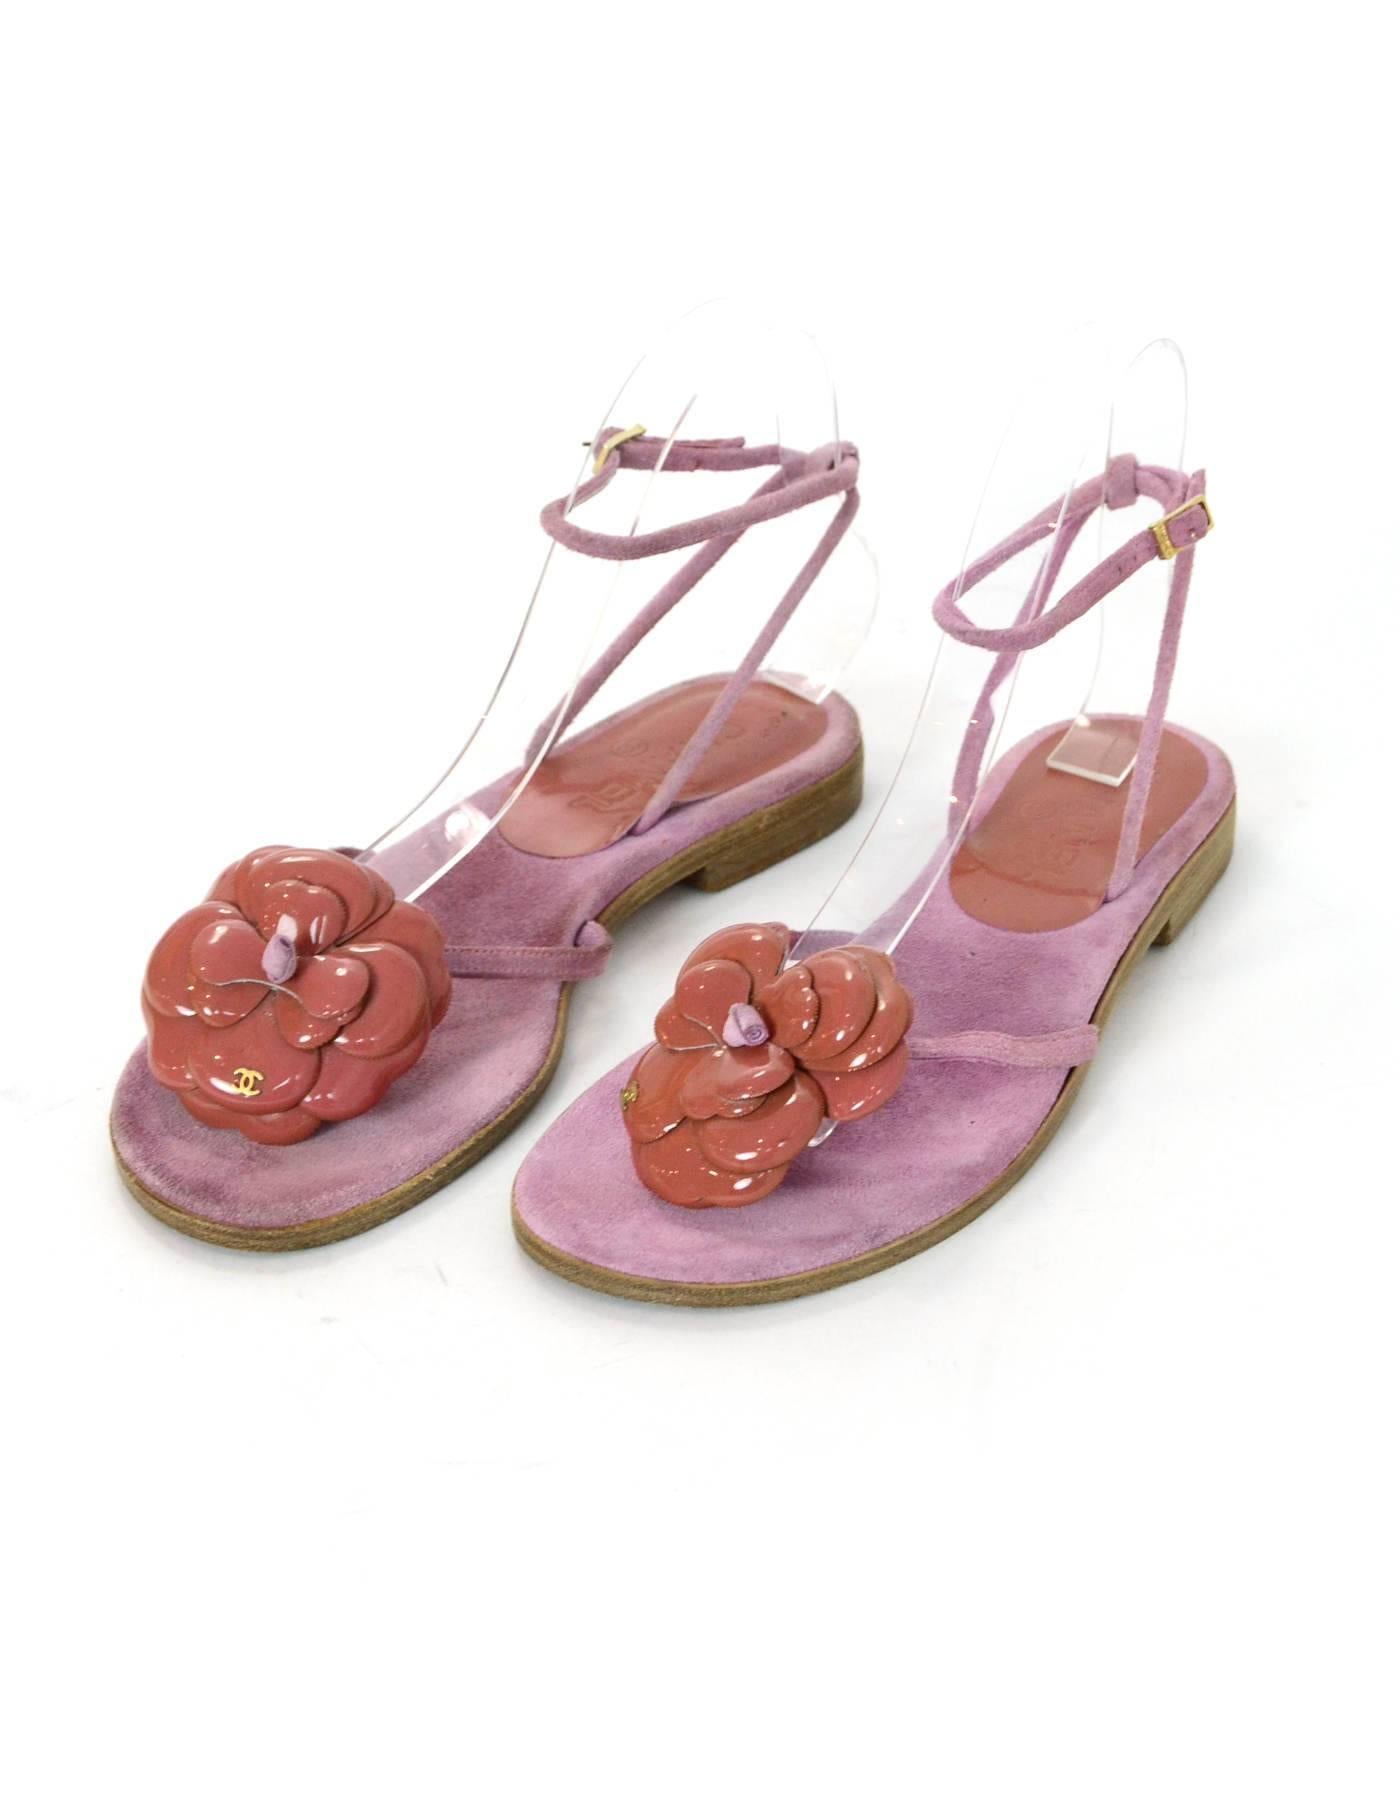 Chanel Pink Suede Camellia Sandals Sz 37.5

Made In: Italy
Color: Pink
Materials: Suede
Closure/Opening: Buckle closure at ankle
Sole Stamp: CC Made in Italy 37.5
Overall Condition: Very good pre-owned condition with the exception of wear at